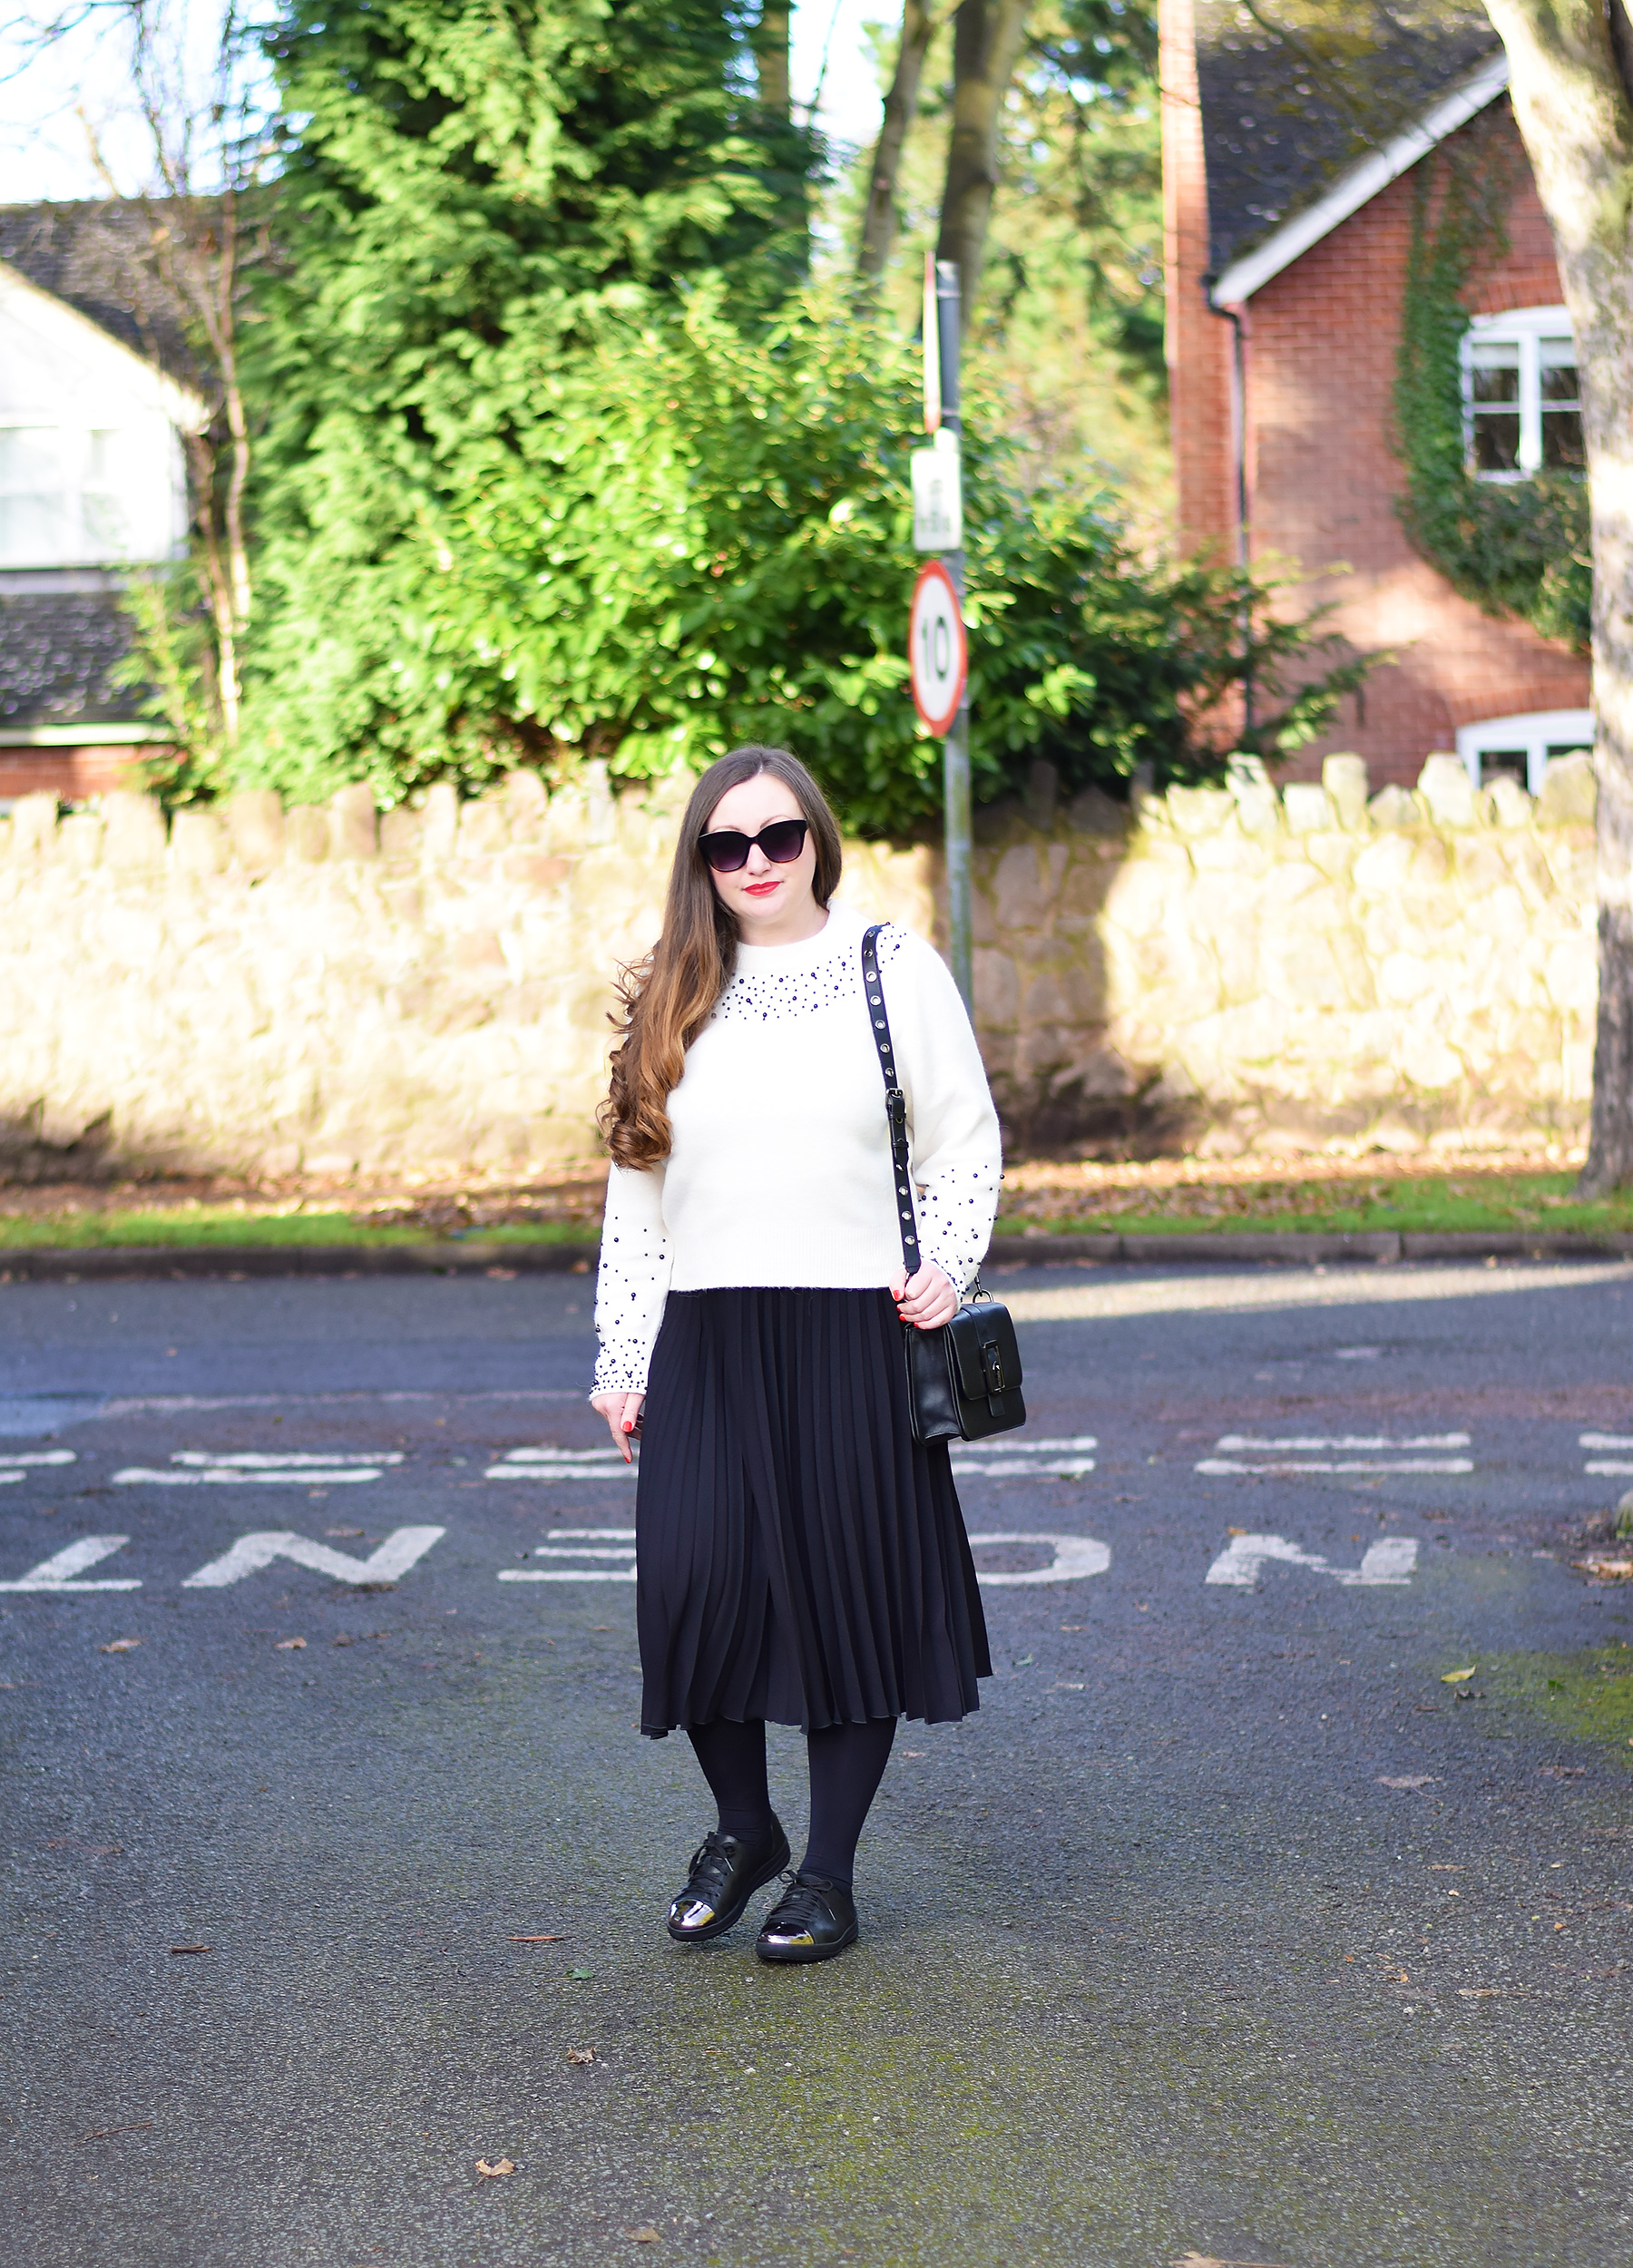 Pleated skirt with tights and trainers outfit